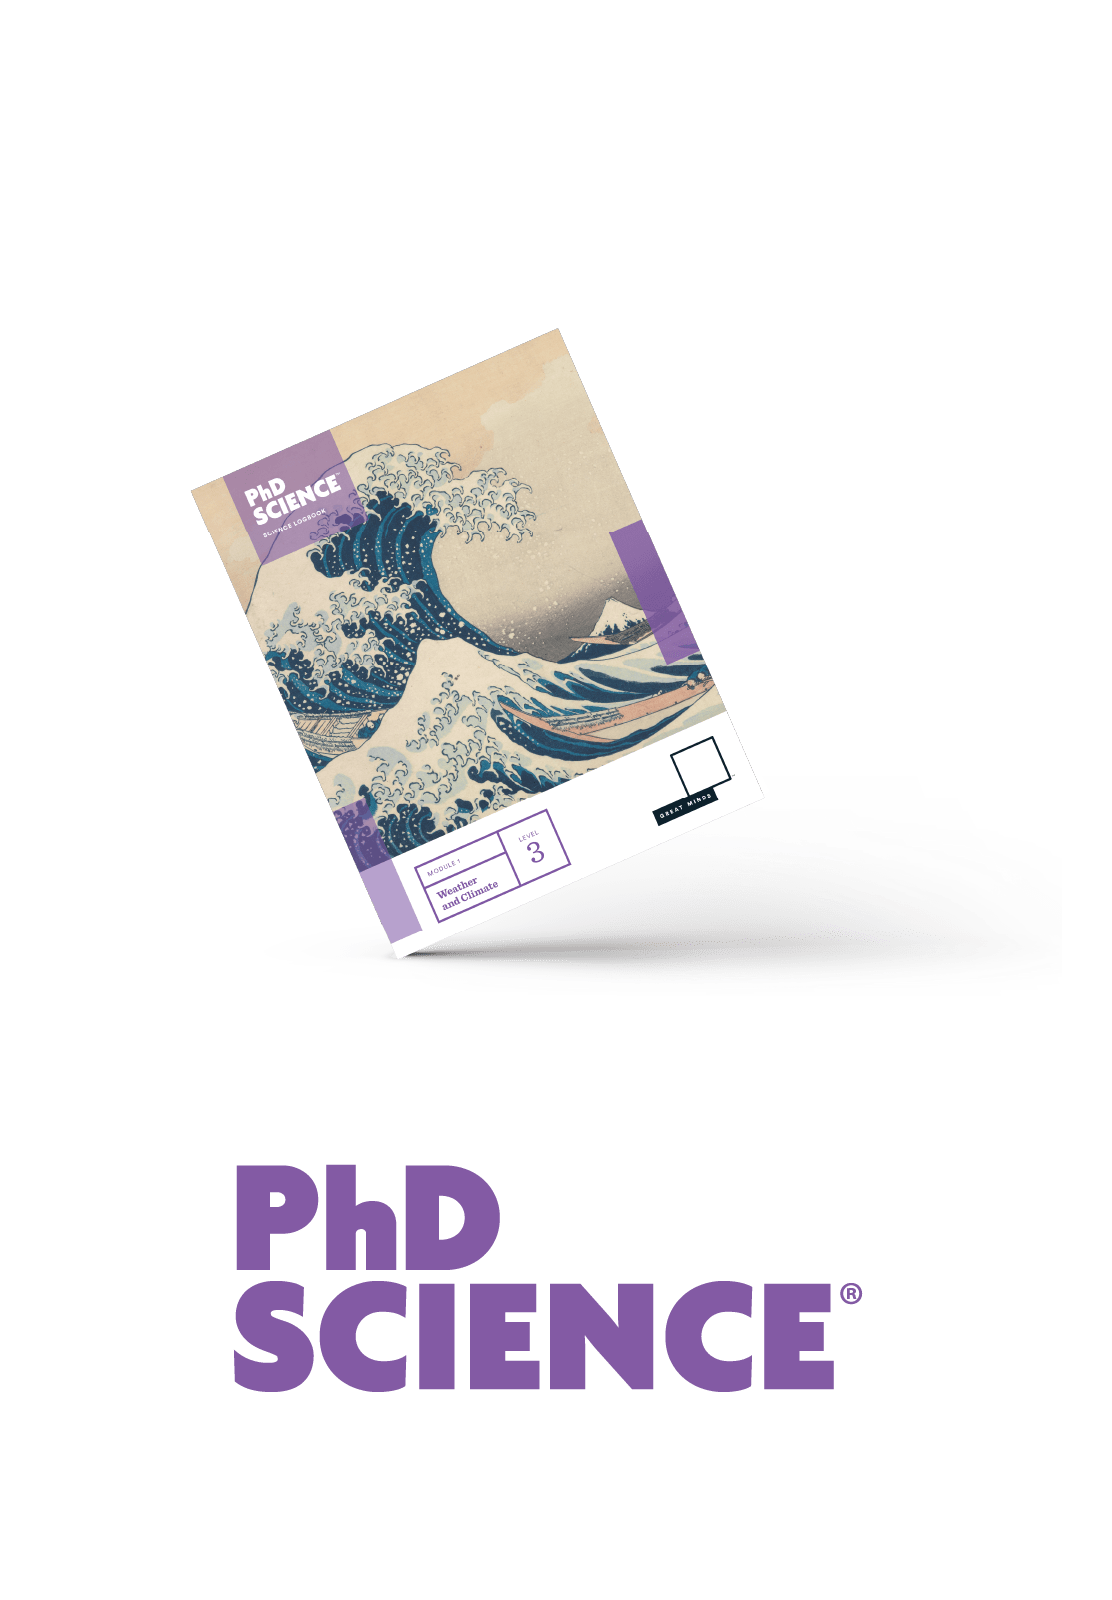 Great Minds - PhD Science